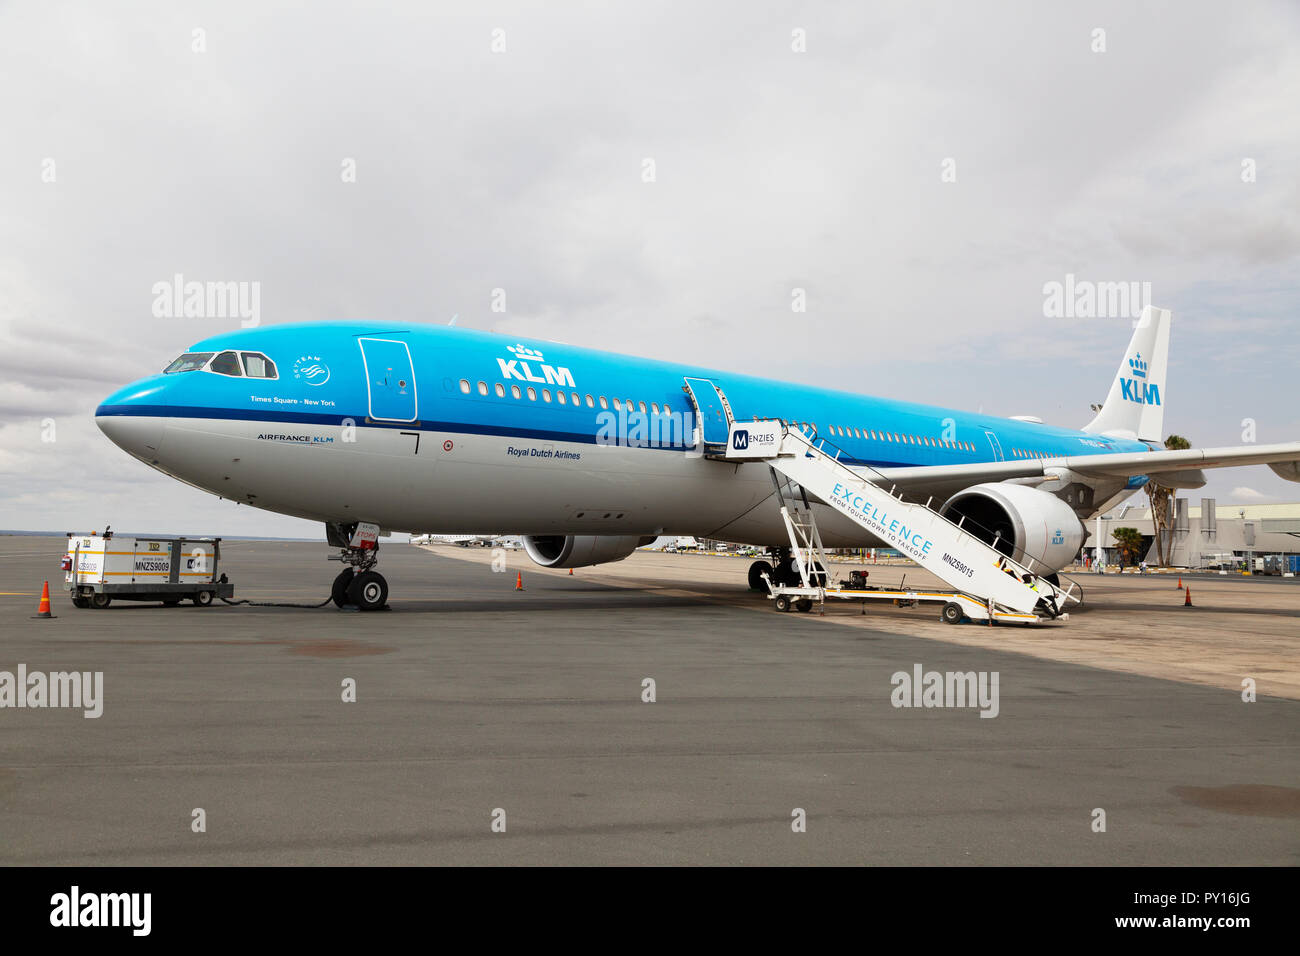 A KLM ( Royal Dutch Airlines ) plane on the ground at Windhoek airport Namibia Africa Stock Photo